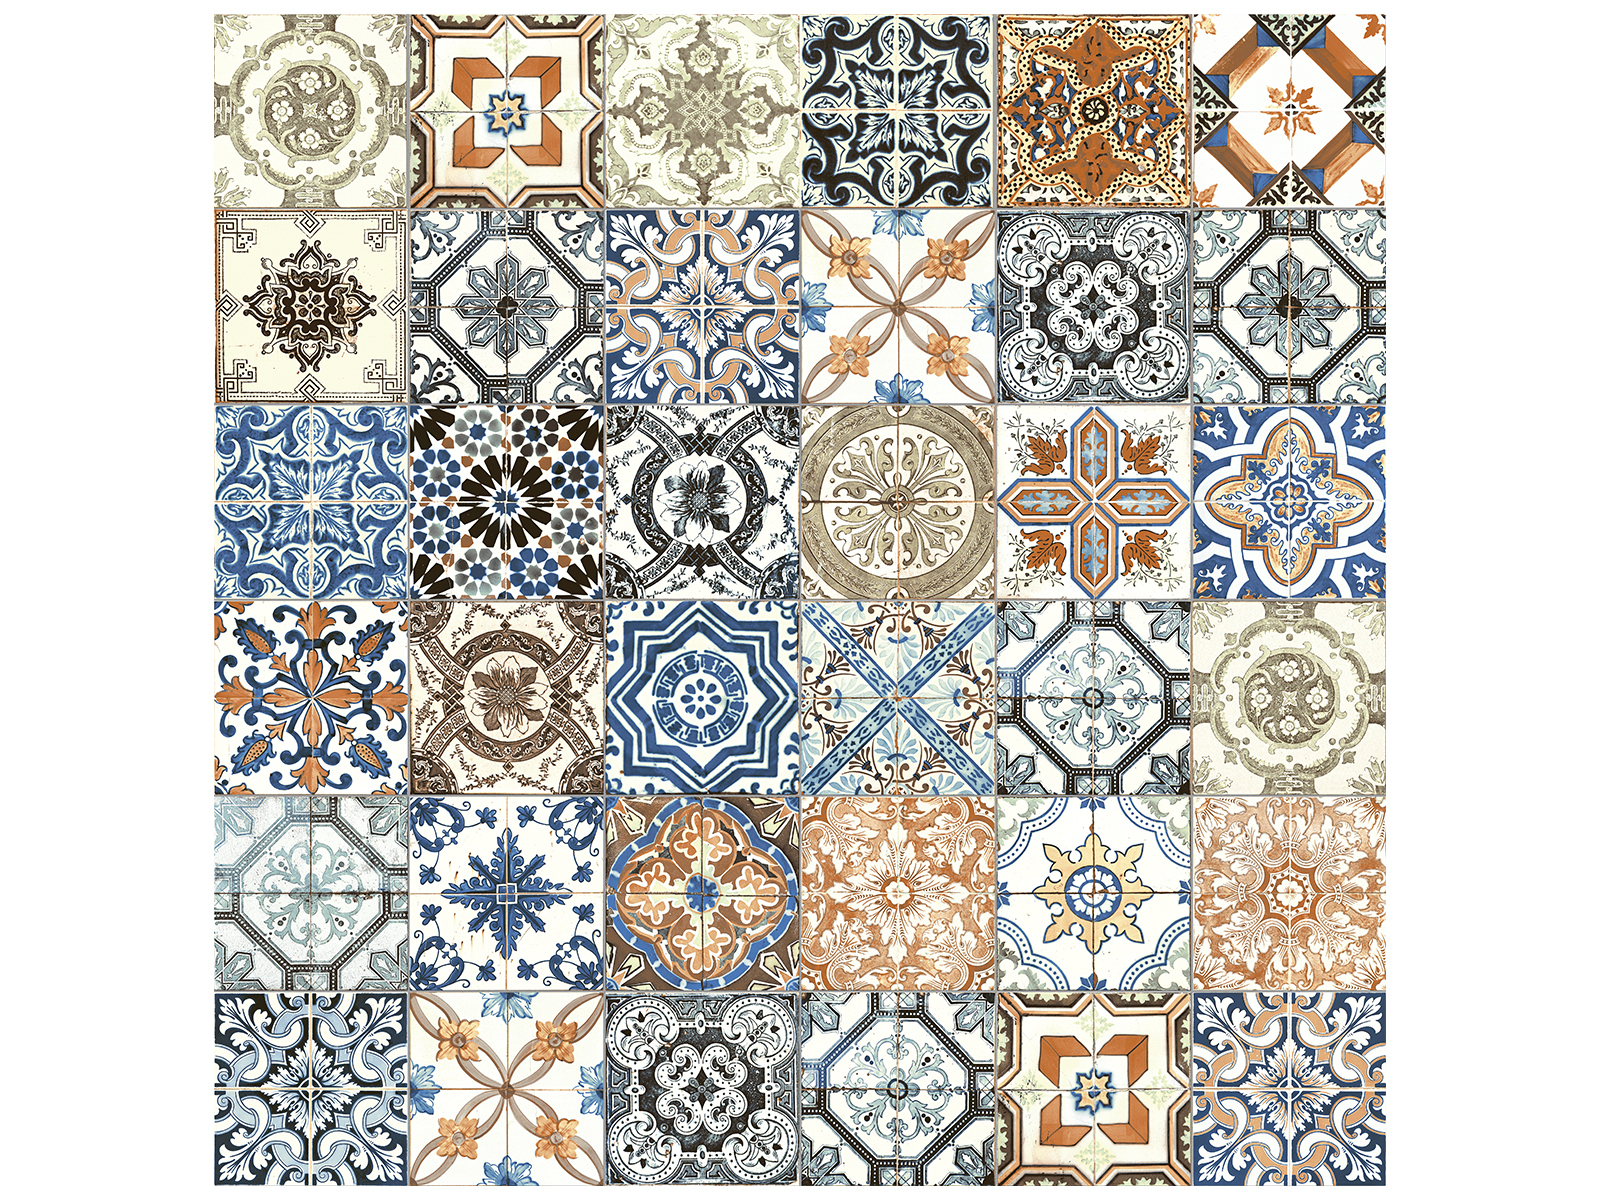 color pattern glazed ceramic field tile from marrakesh anatolia collection distributed by surface group international glossy finish pressed edge 8x8 square shape